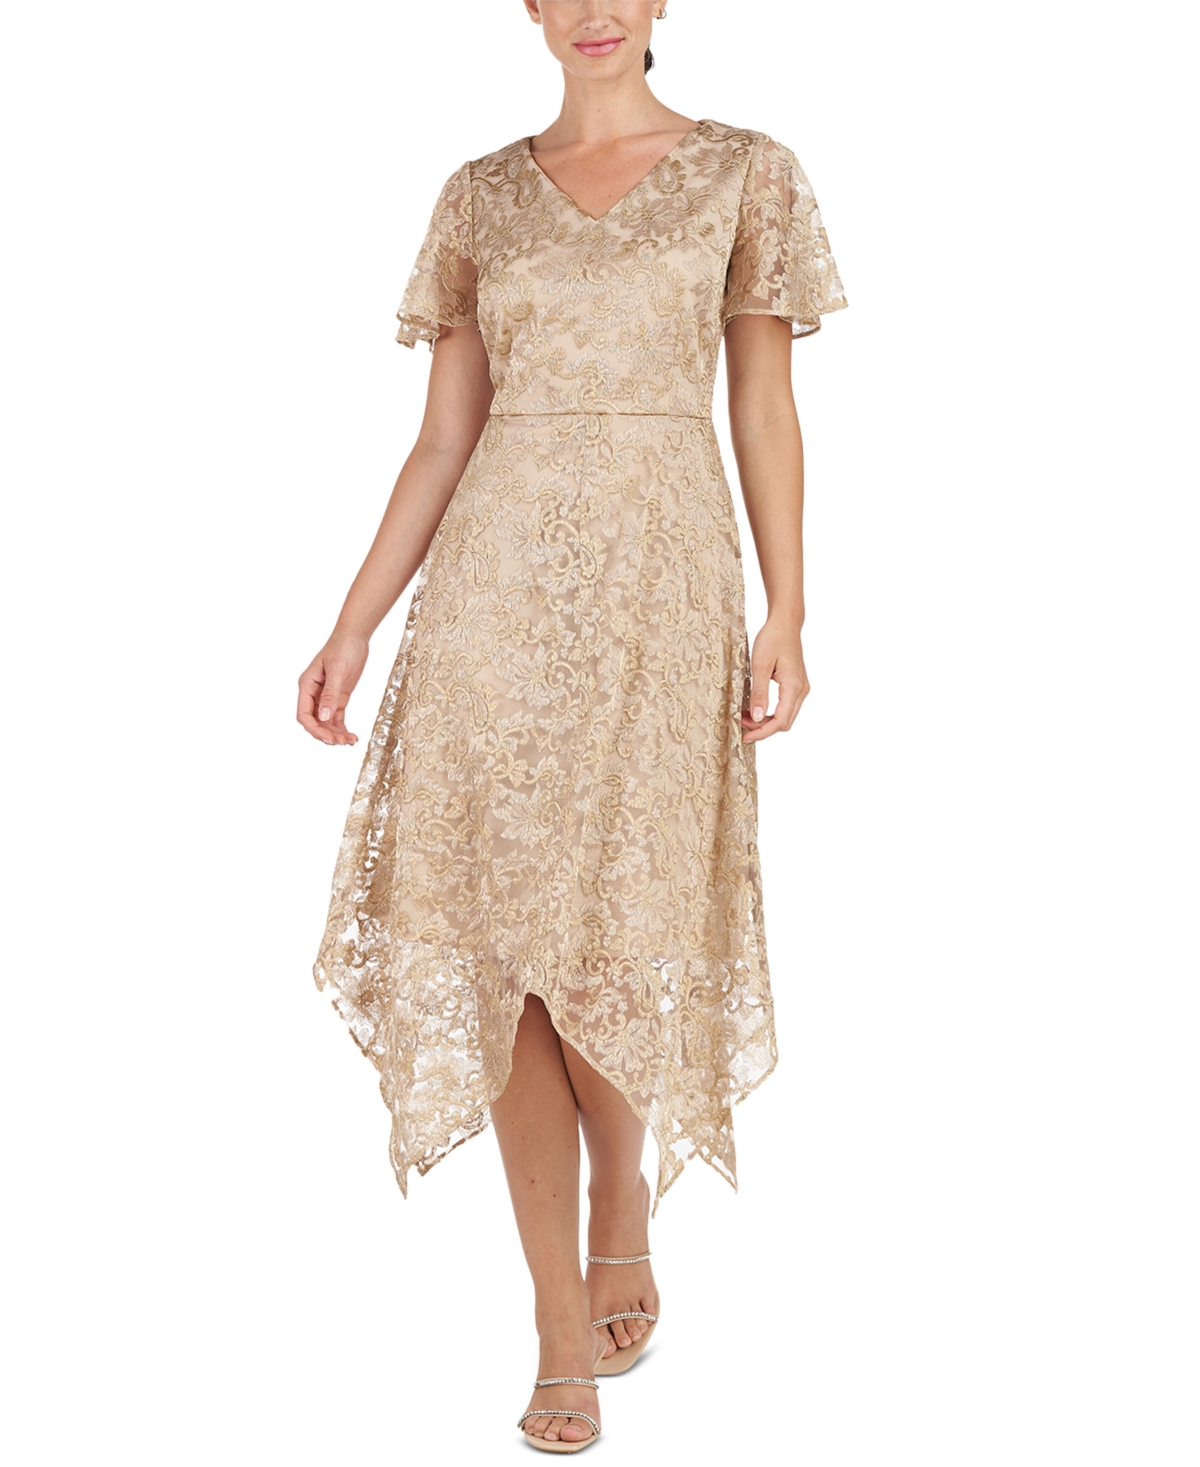 Great Gatsby Dress – Great Gatsby Dresses for Sale Js Collections Womens Emerson Embroidered Dress - Gold $123.99 AT vintagedancer.com